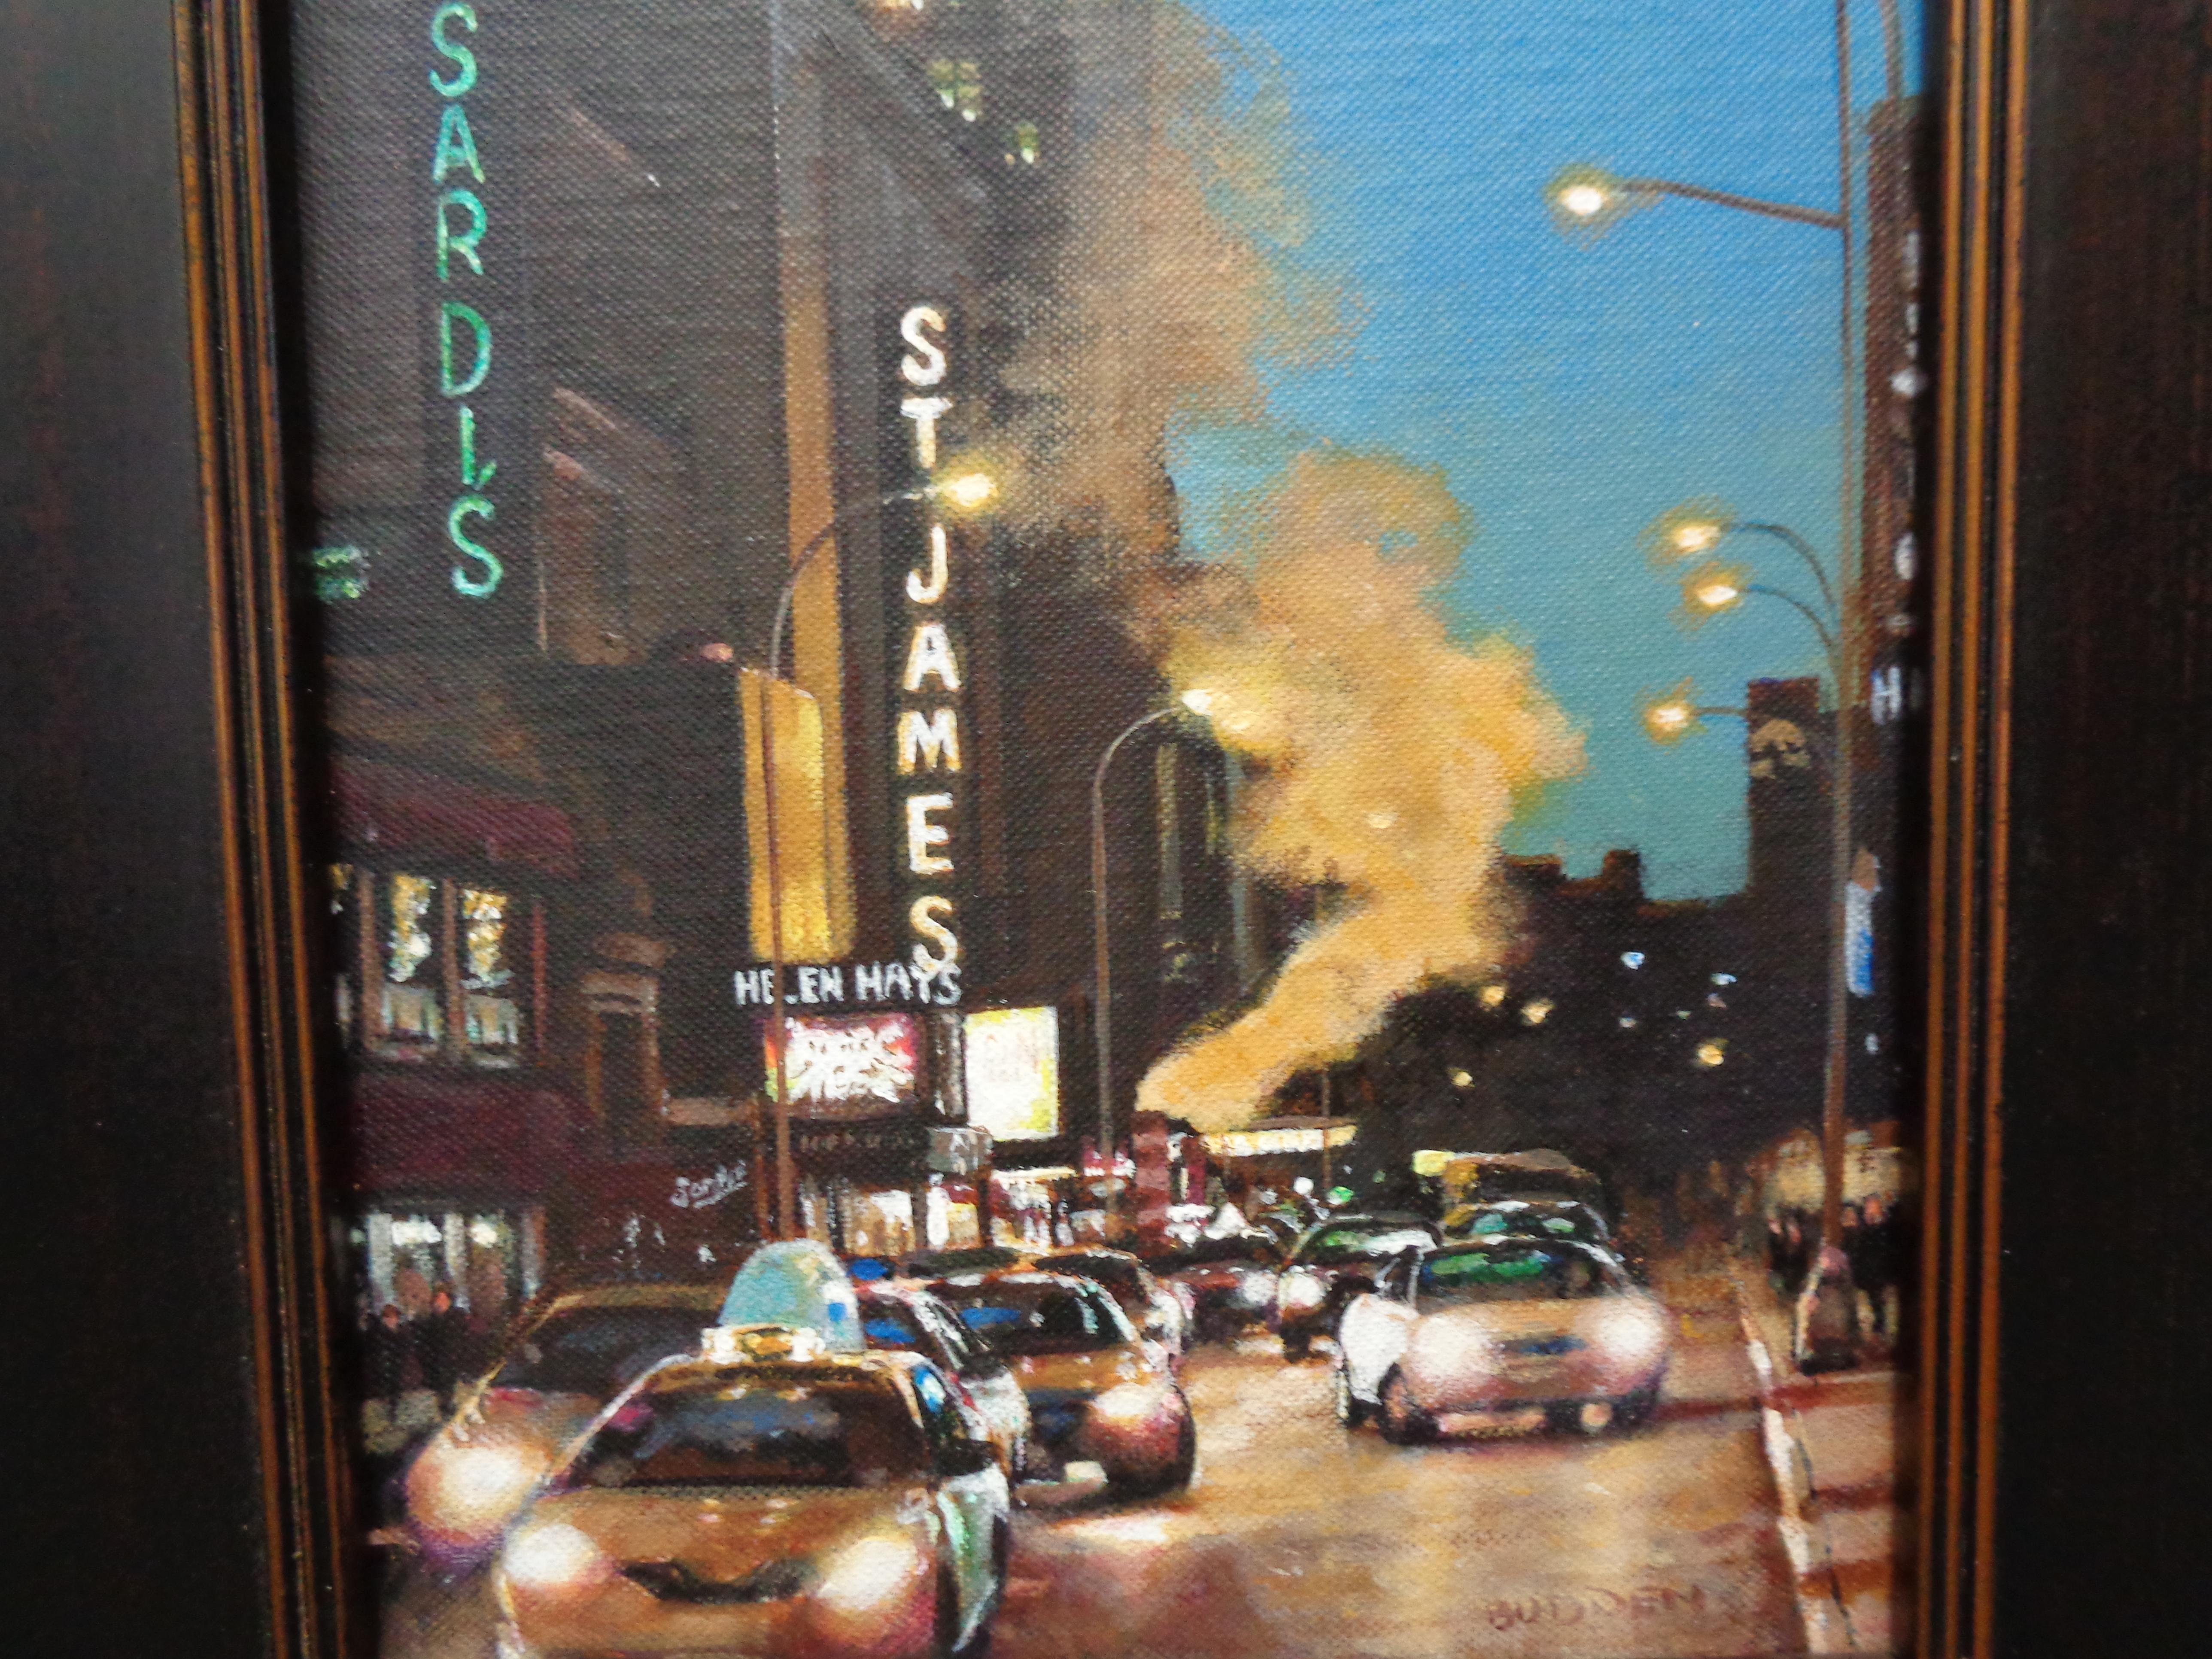  New York City Painting Michael Budden Evening On Broadway St James & Sardis For Sale 2